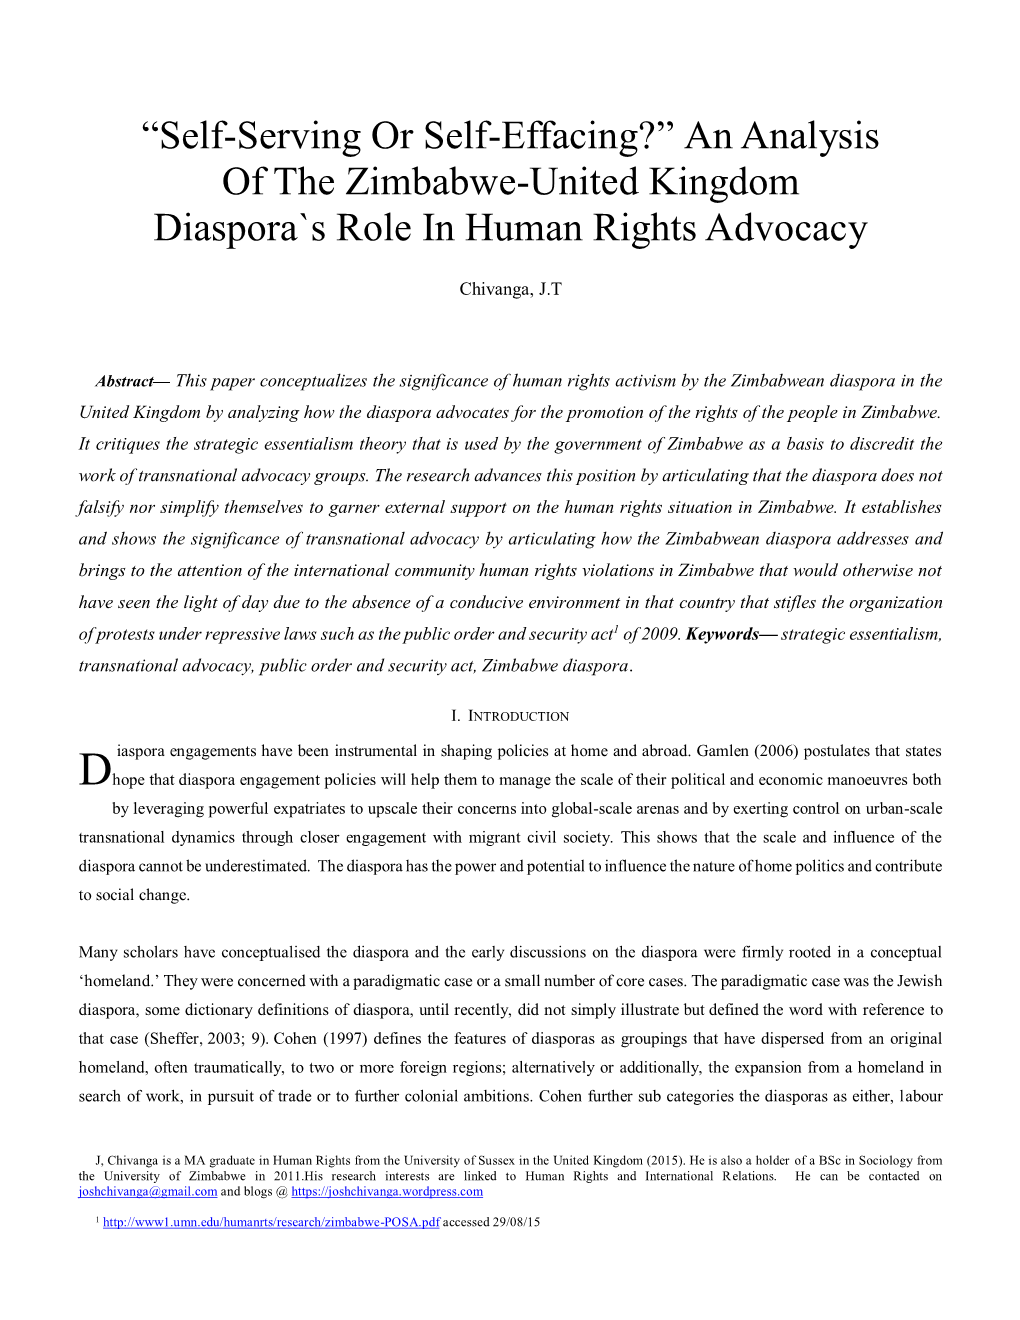 An Analysis of the Zimbabwe-United Kingdom Diaspora`S Role in Human Rights Advocacy